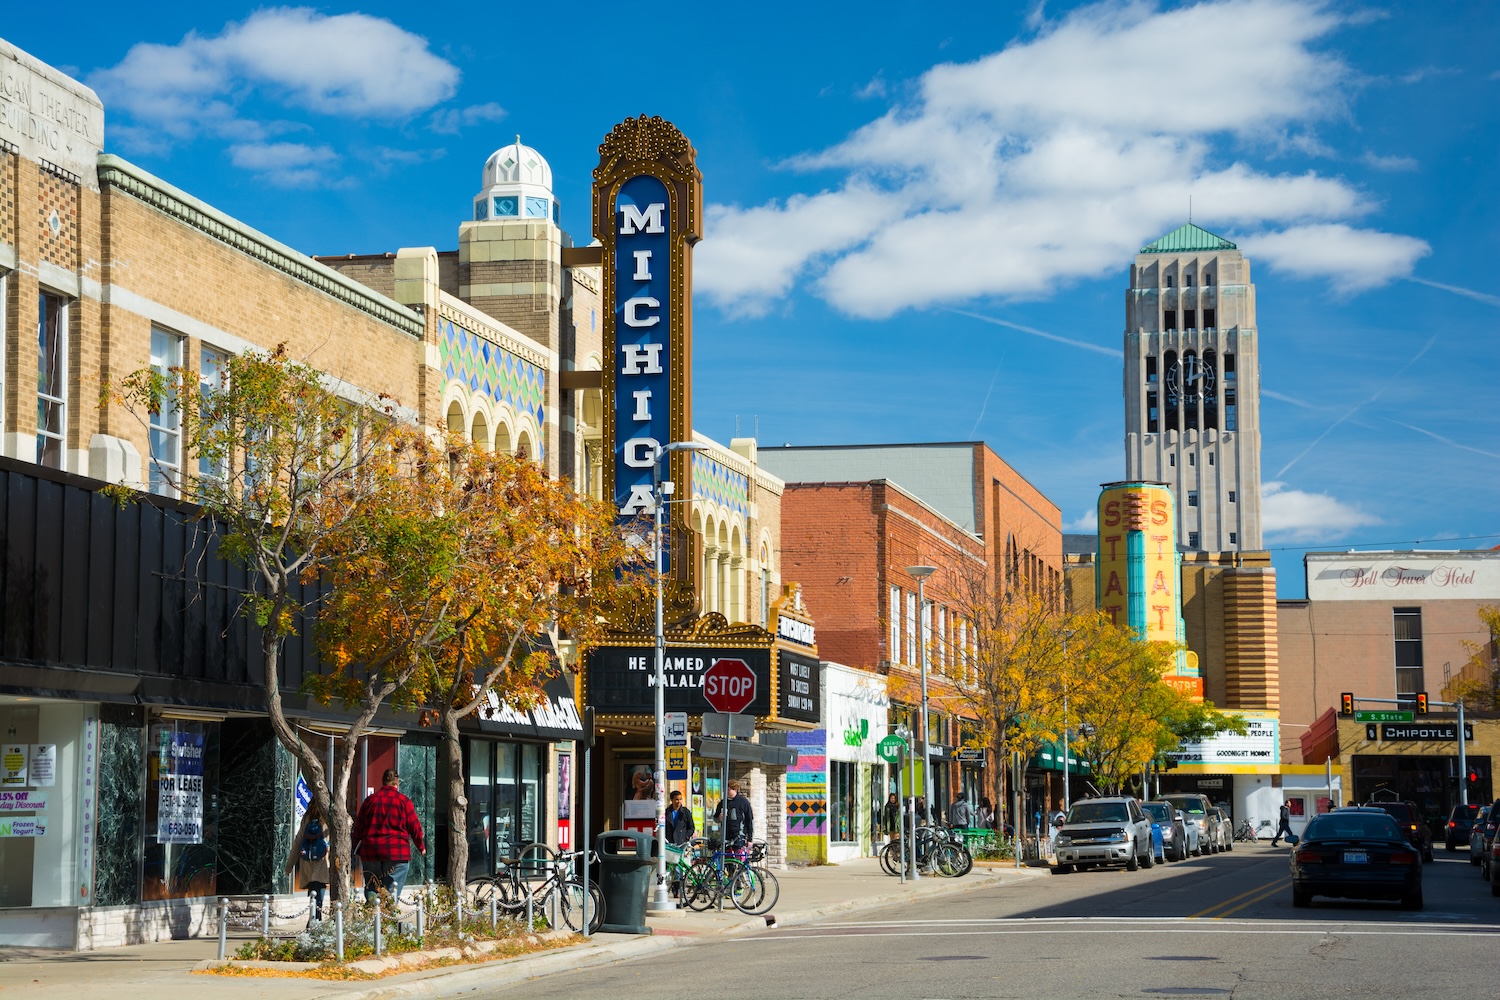 Ann Arbor, United States - October 18, 2015 - People walking in the sidewalk of Liberty Street in Downtown Ann Arbor, with storefronts and the Michigan Theater sign, State Theater sign, cars and parked bicycles in the scene, and the Burton Memorial Tower in the distance, during a day with a blue sky with clouds.